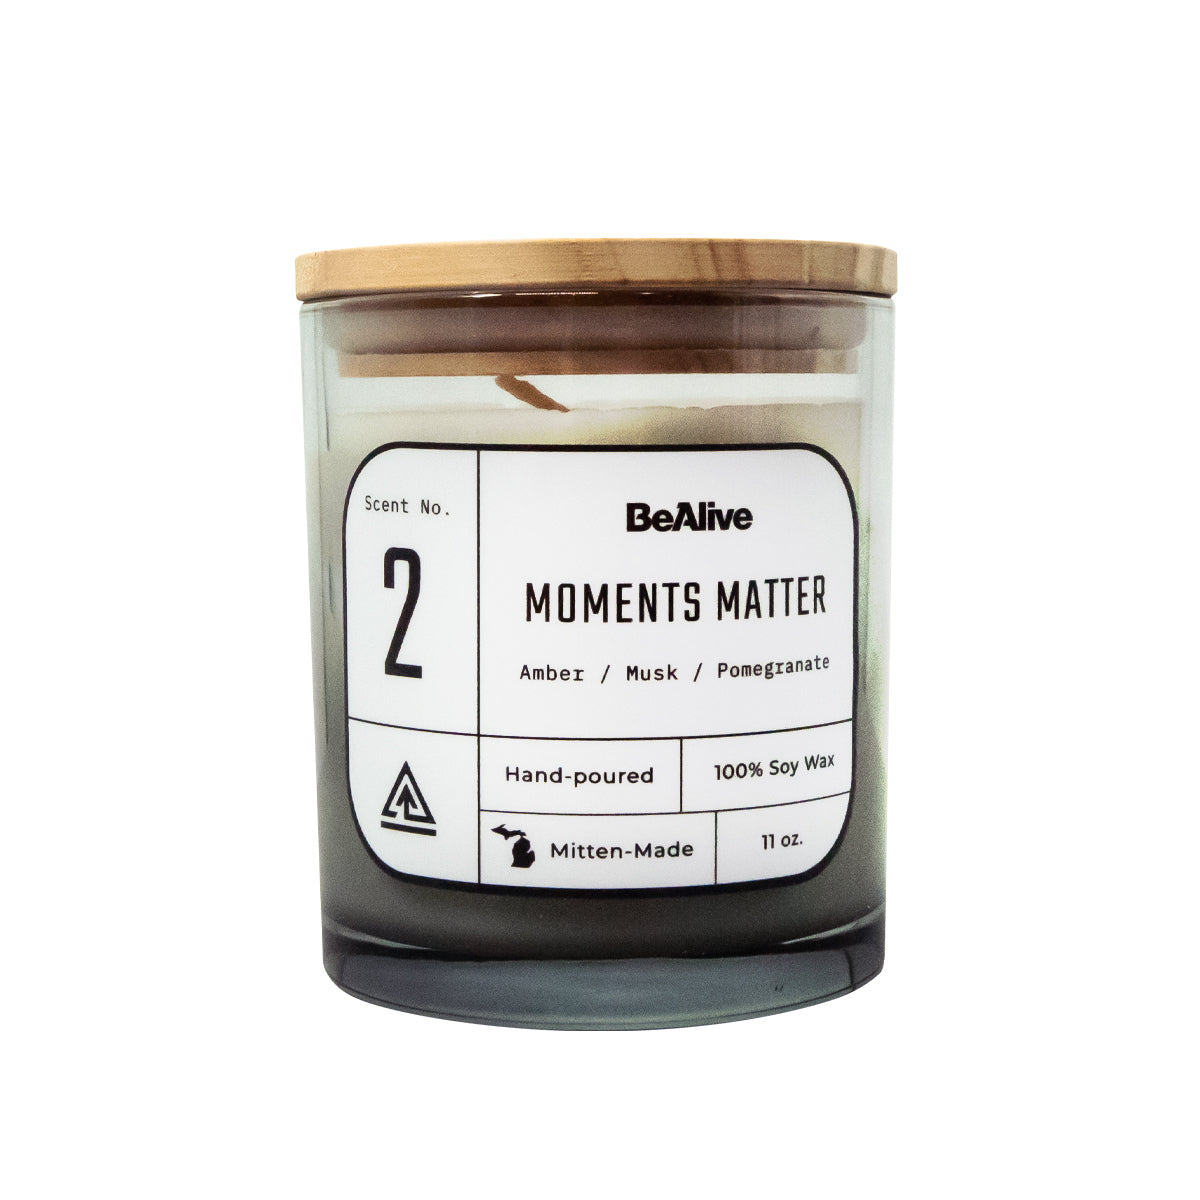 Moments Matter No.2 |  Amber, Musk, and Pomegranate Scented Candle (Made in Michigan)